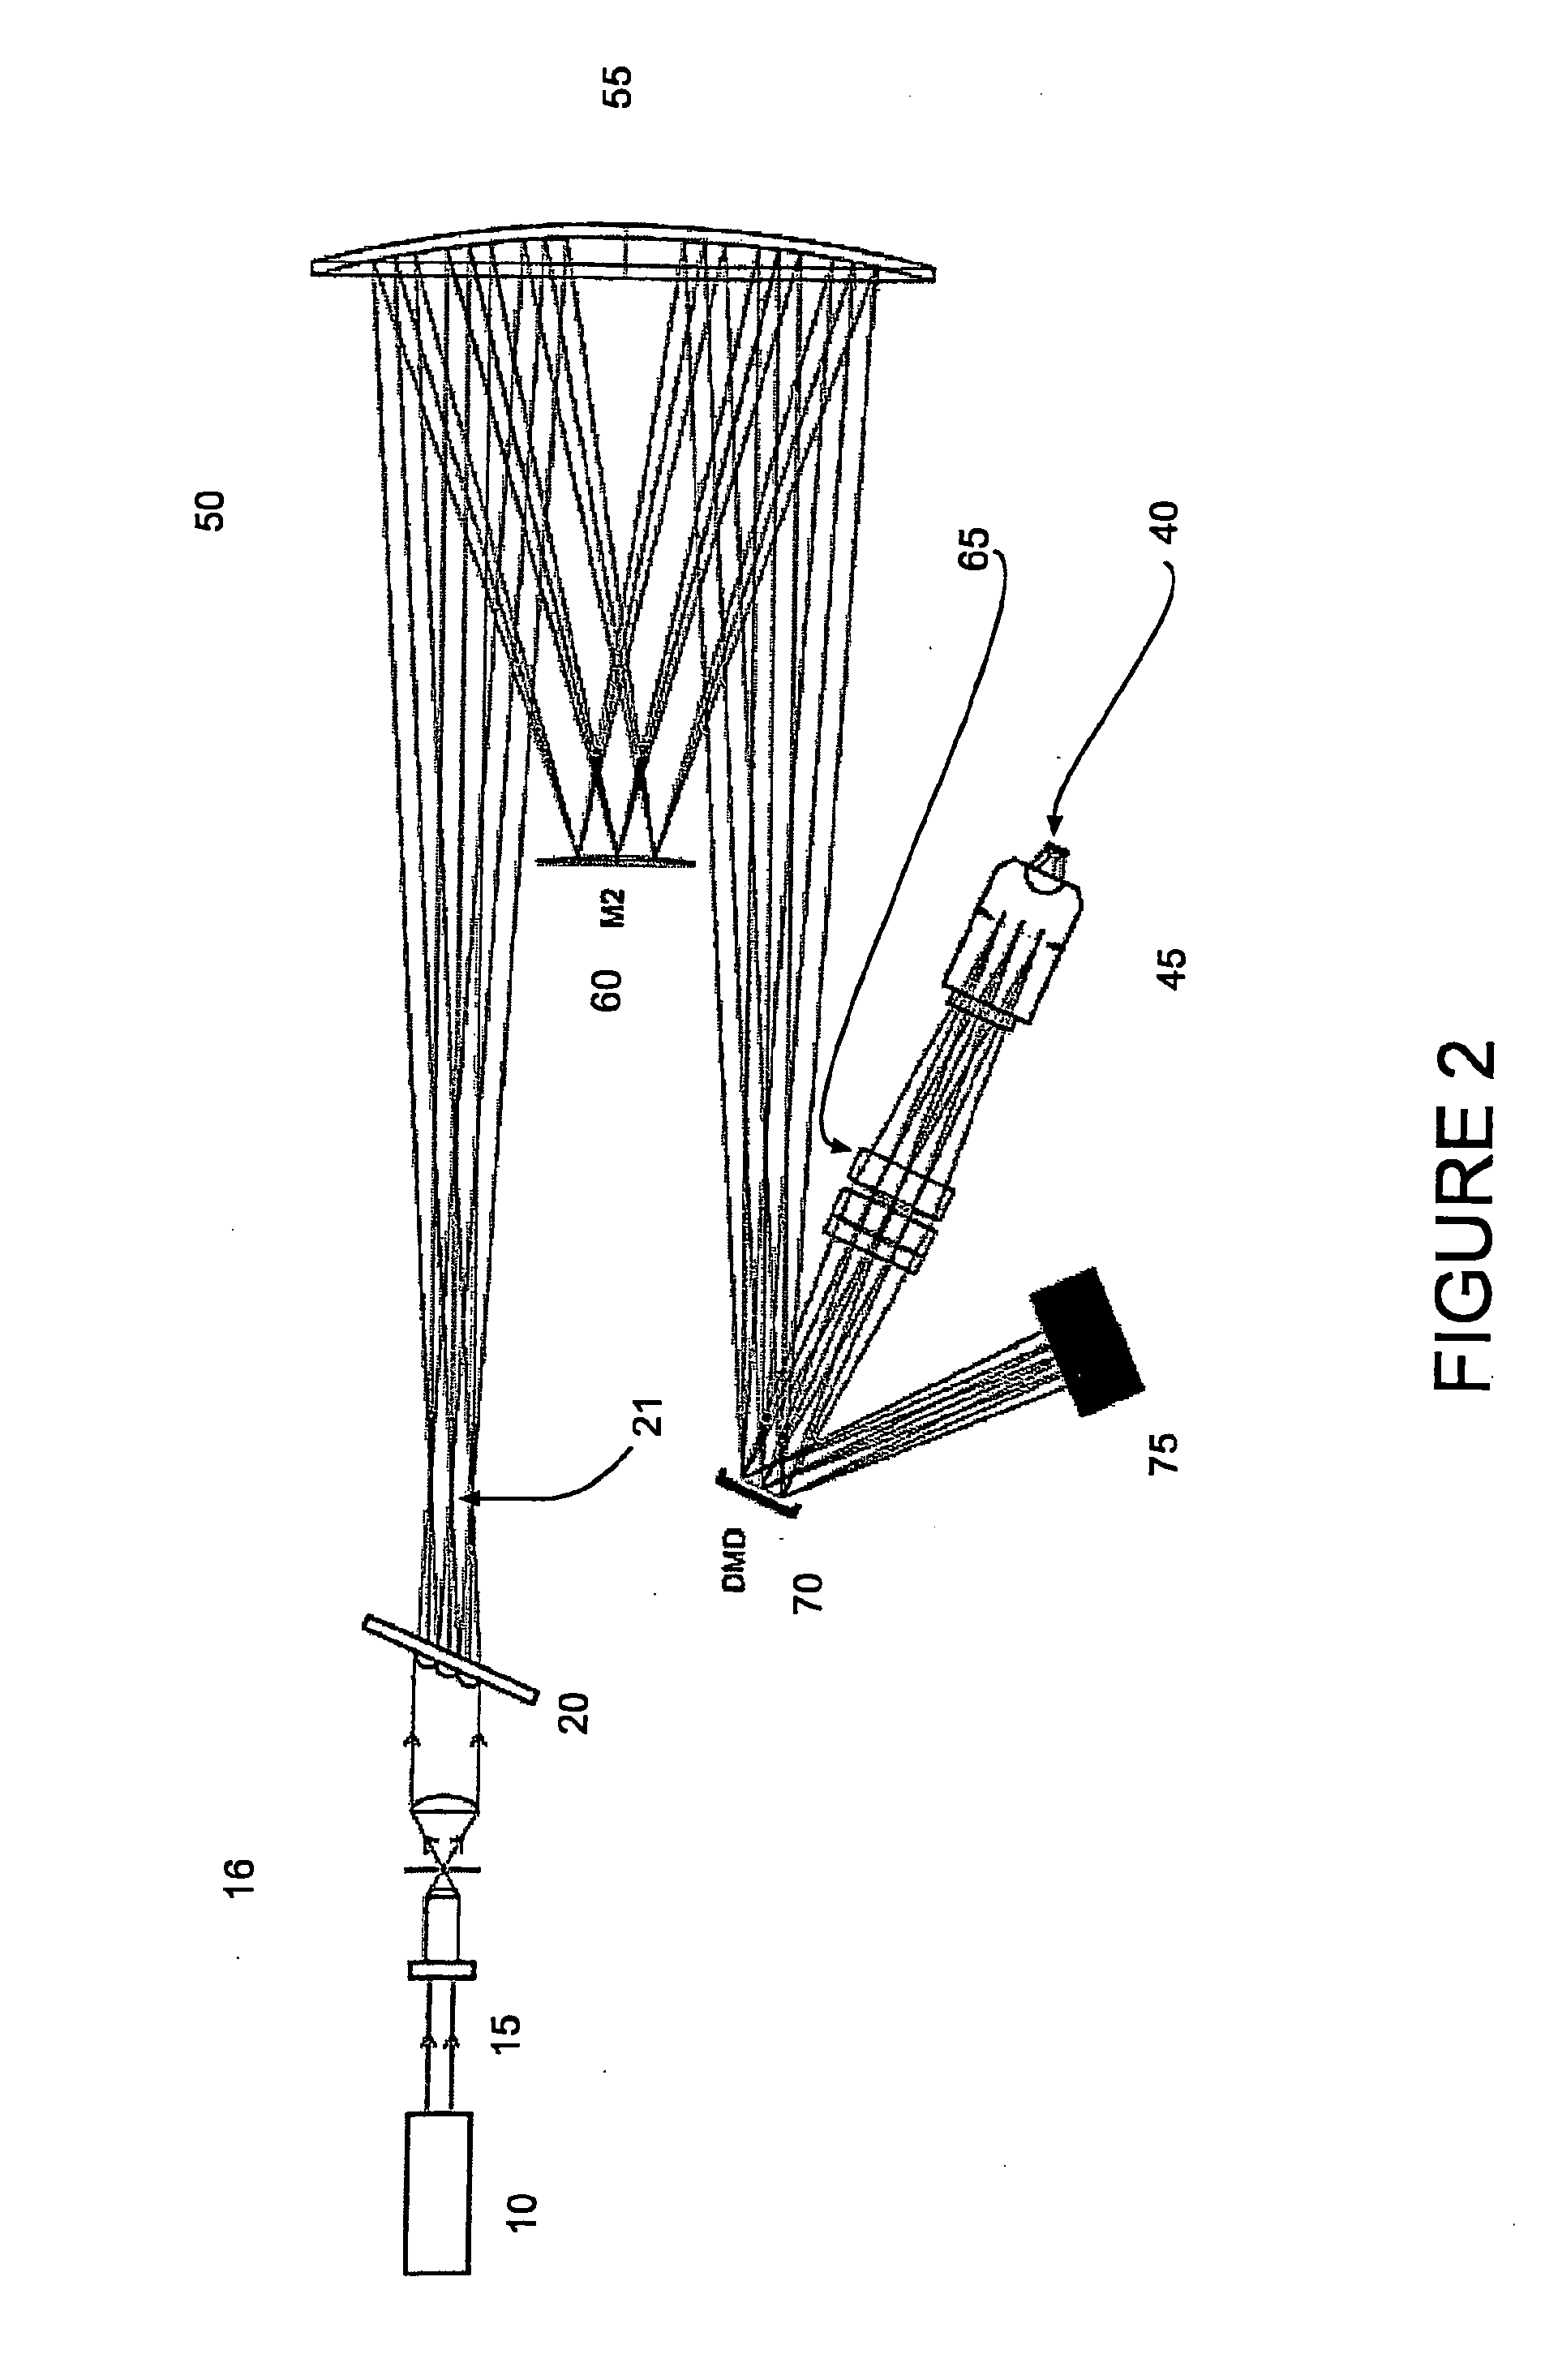 Optical Array Device and Methods of Use Thereof for Screening, Analysis and Manipulation of Particles